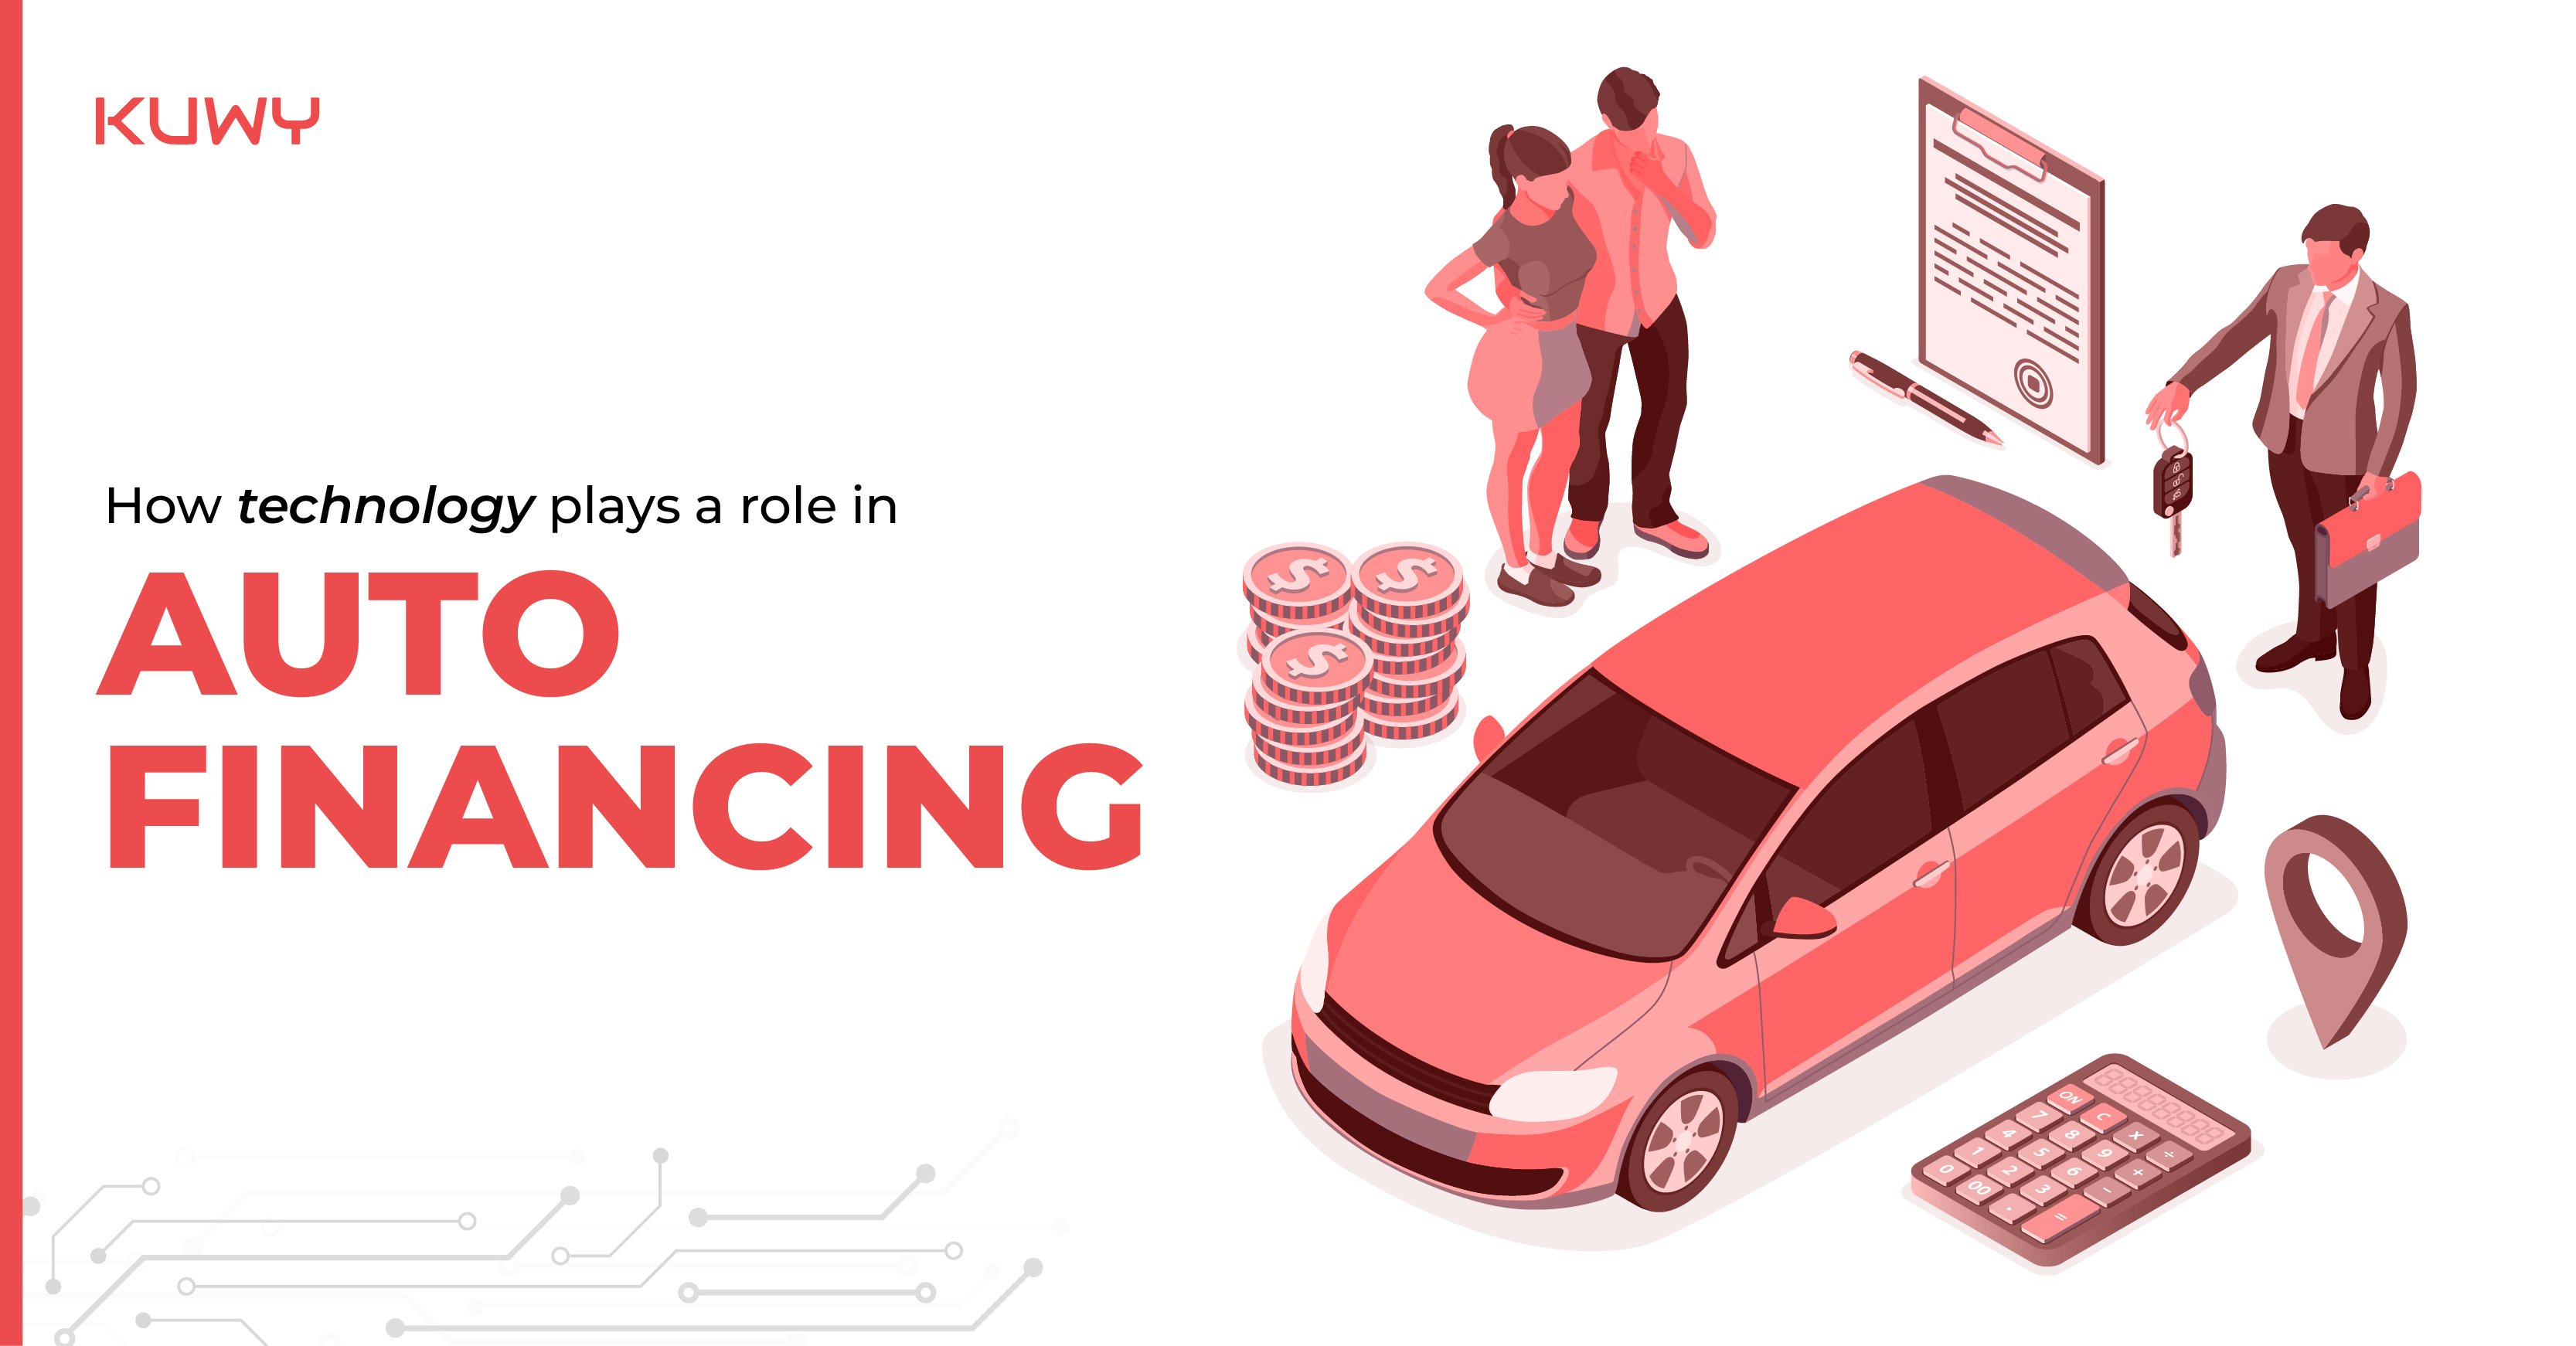 How technology plays a role in Auto Financing